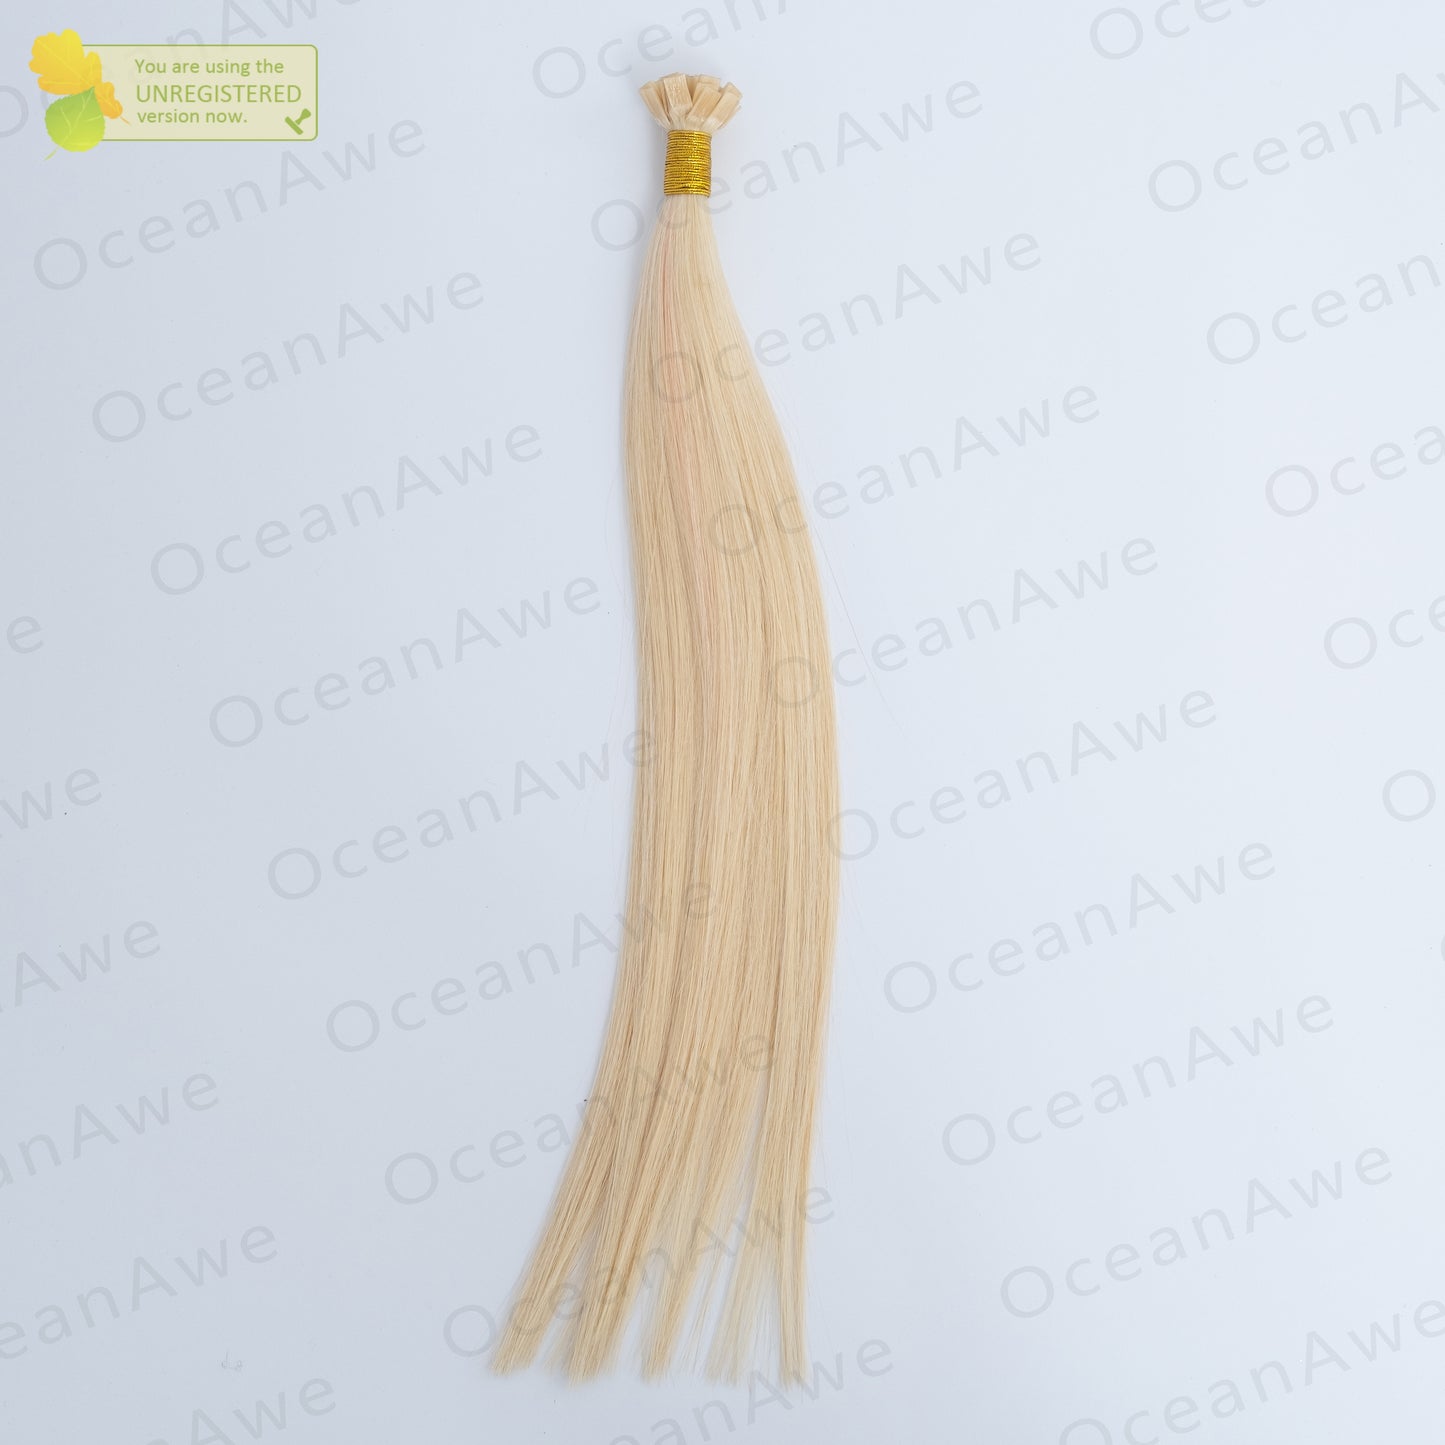 4 Sets Of Flat Tips Hair Extensions (Wholesale - Final Sale) Delivery takes 2 to 4 weeks